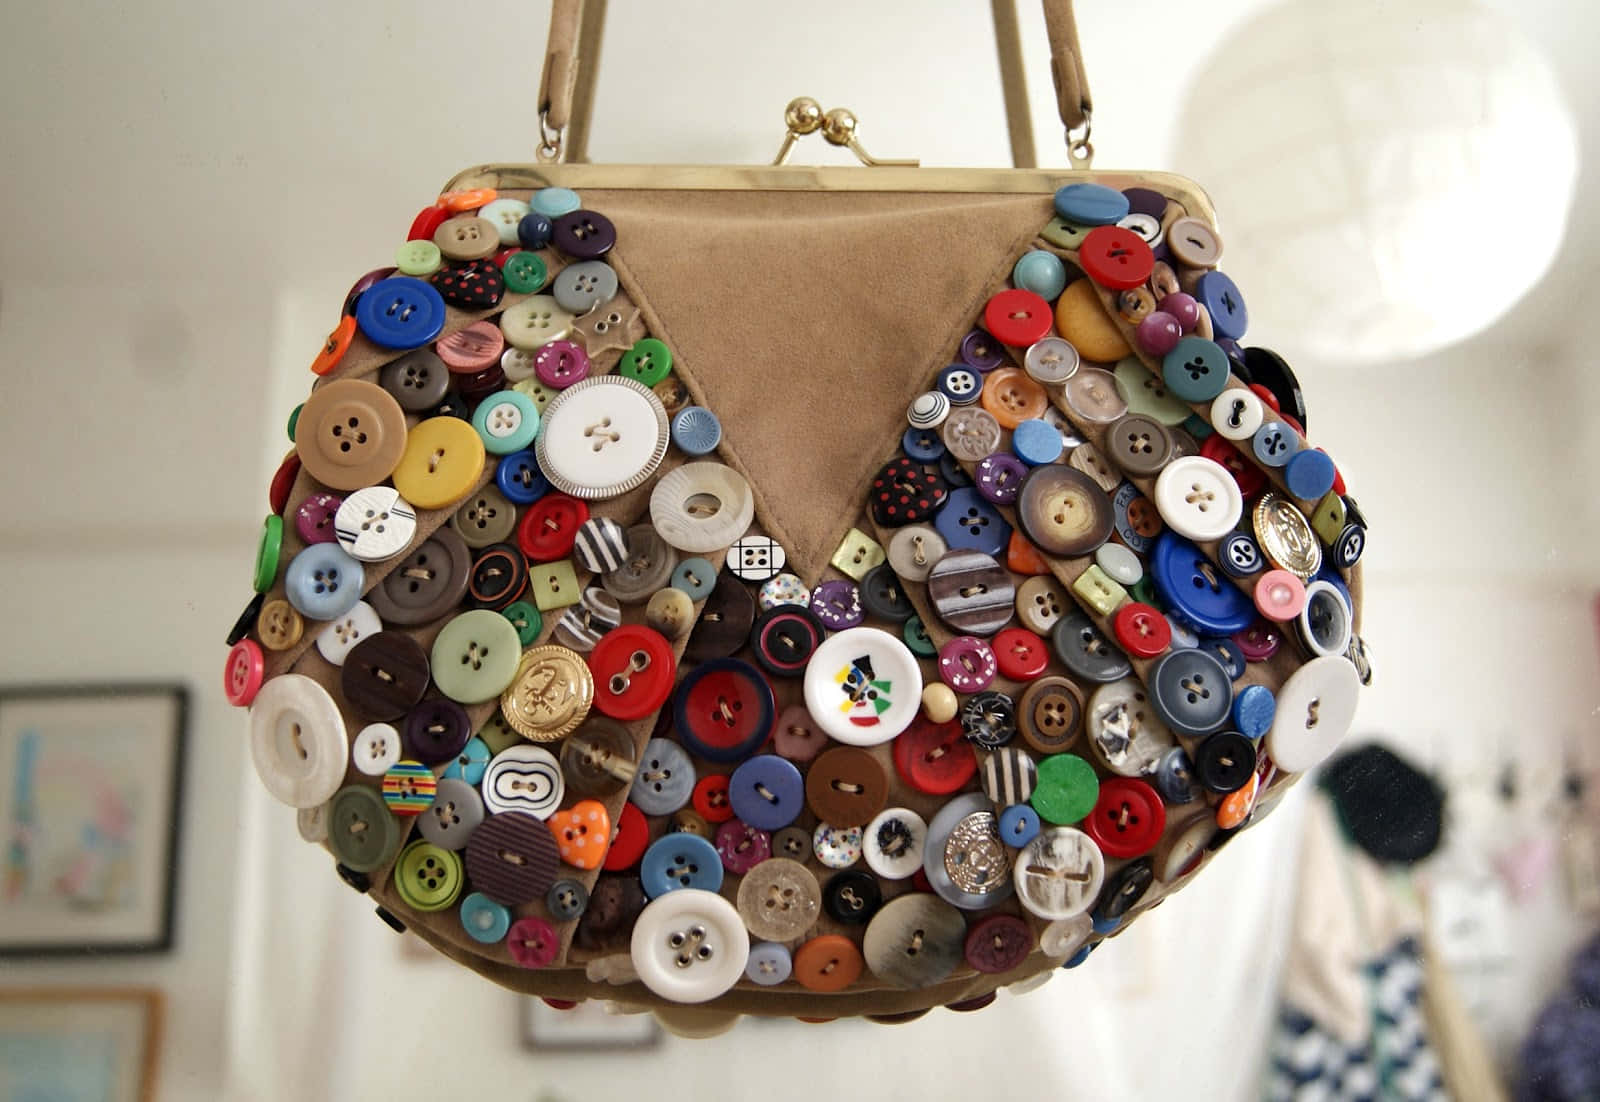 A Bag With Buttons Hanging From It